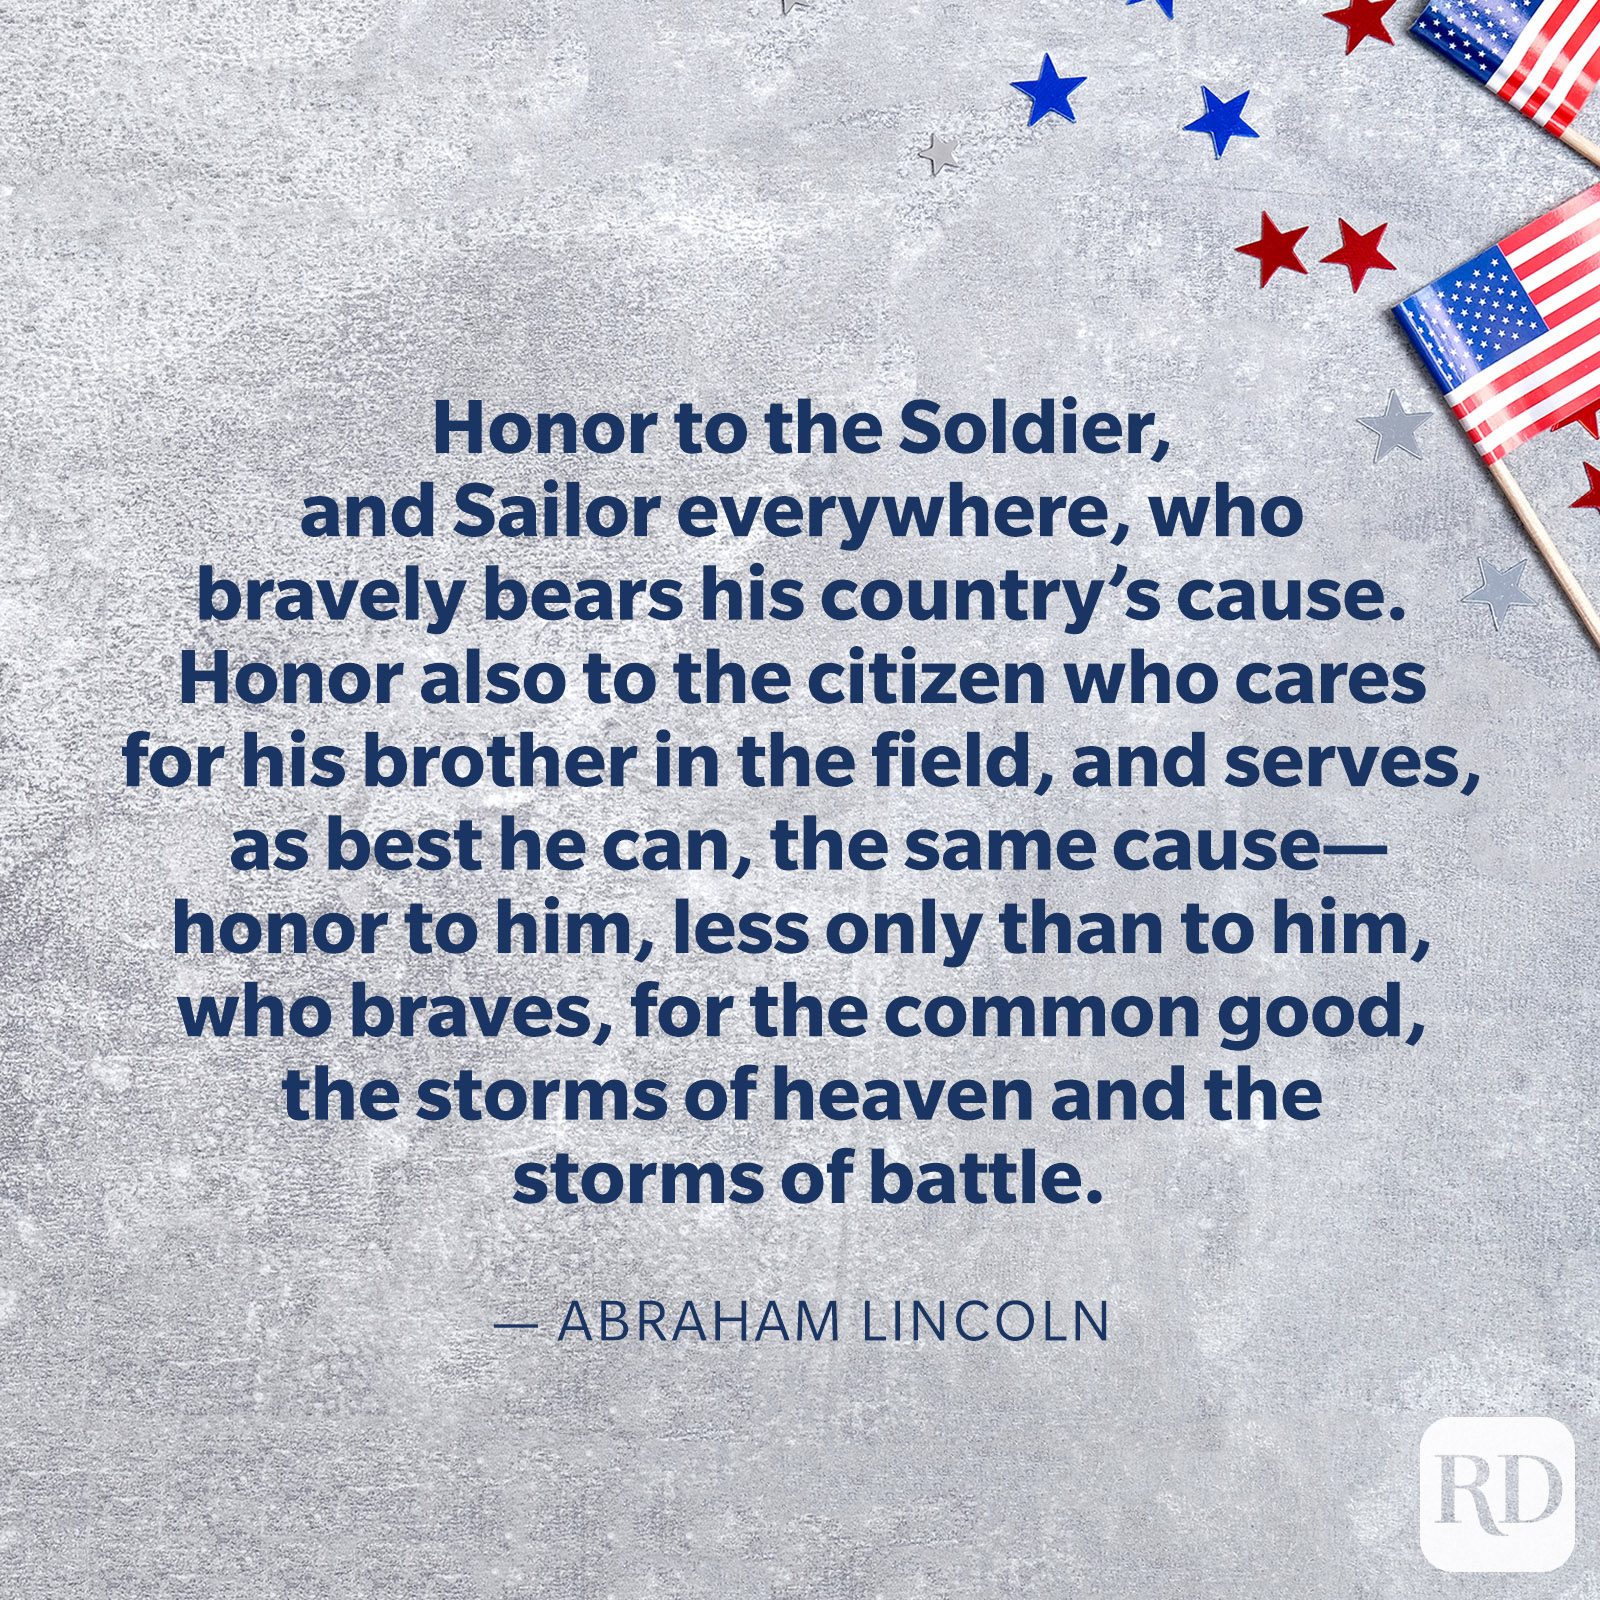 Memorial Day Quotes 50 Quotes About Memorial Day to Share